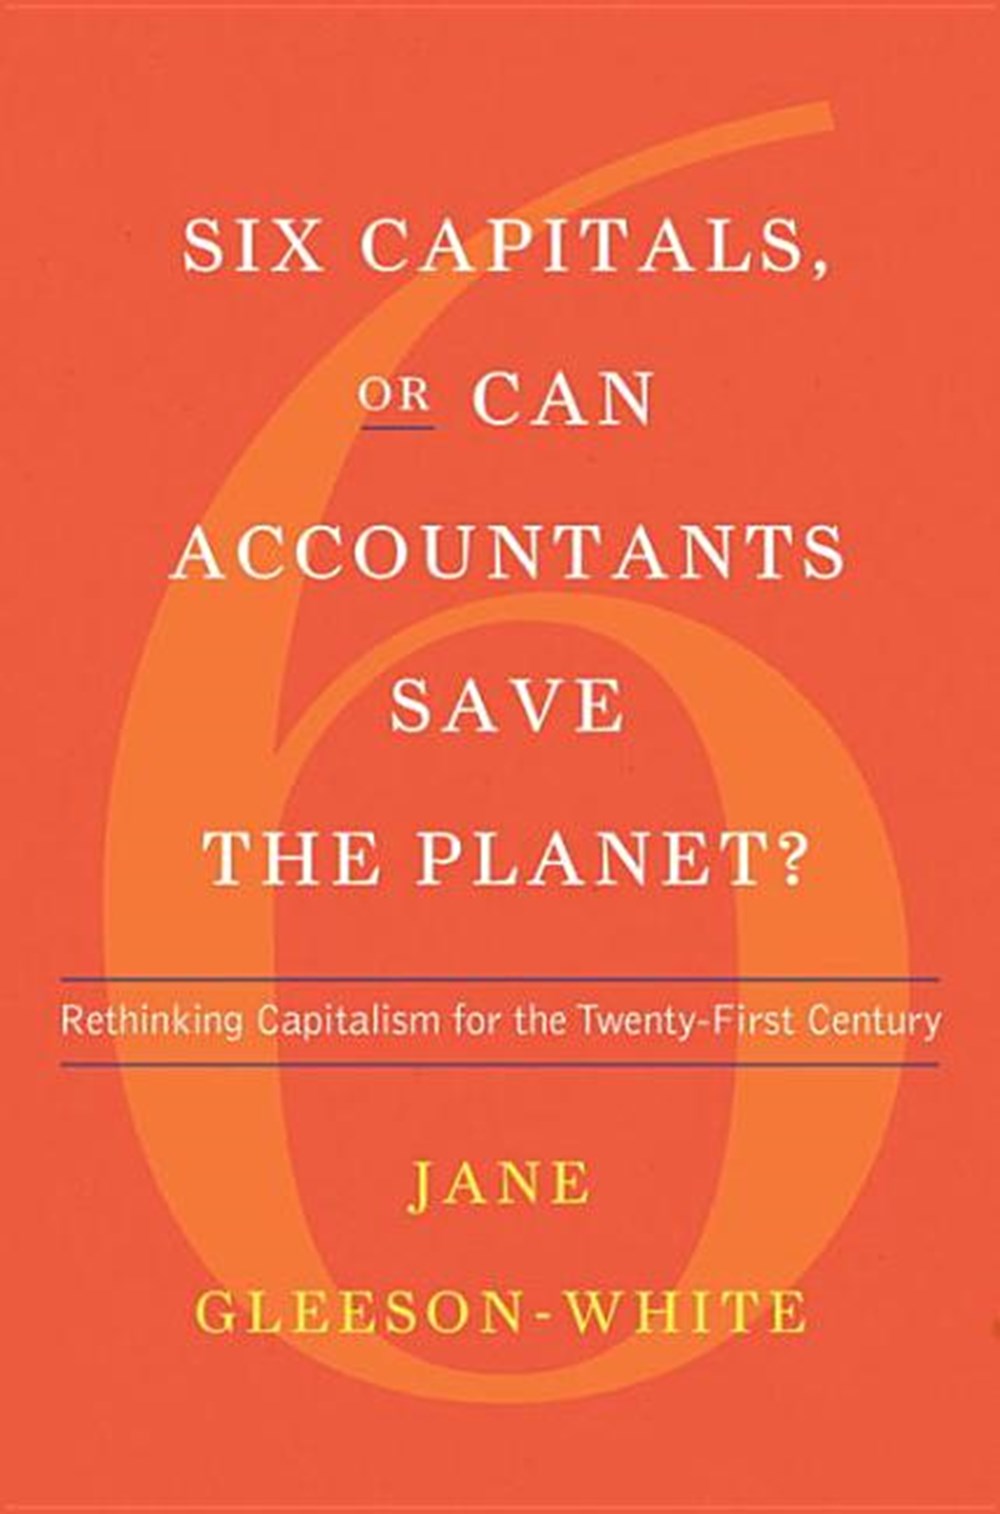 Six Capitals, or Can Accountants Save the Planet? Rethinking Capitalism for the Twenty-First Century